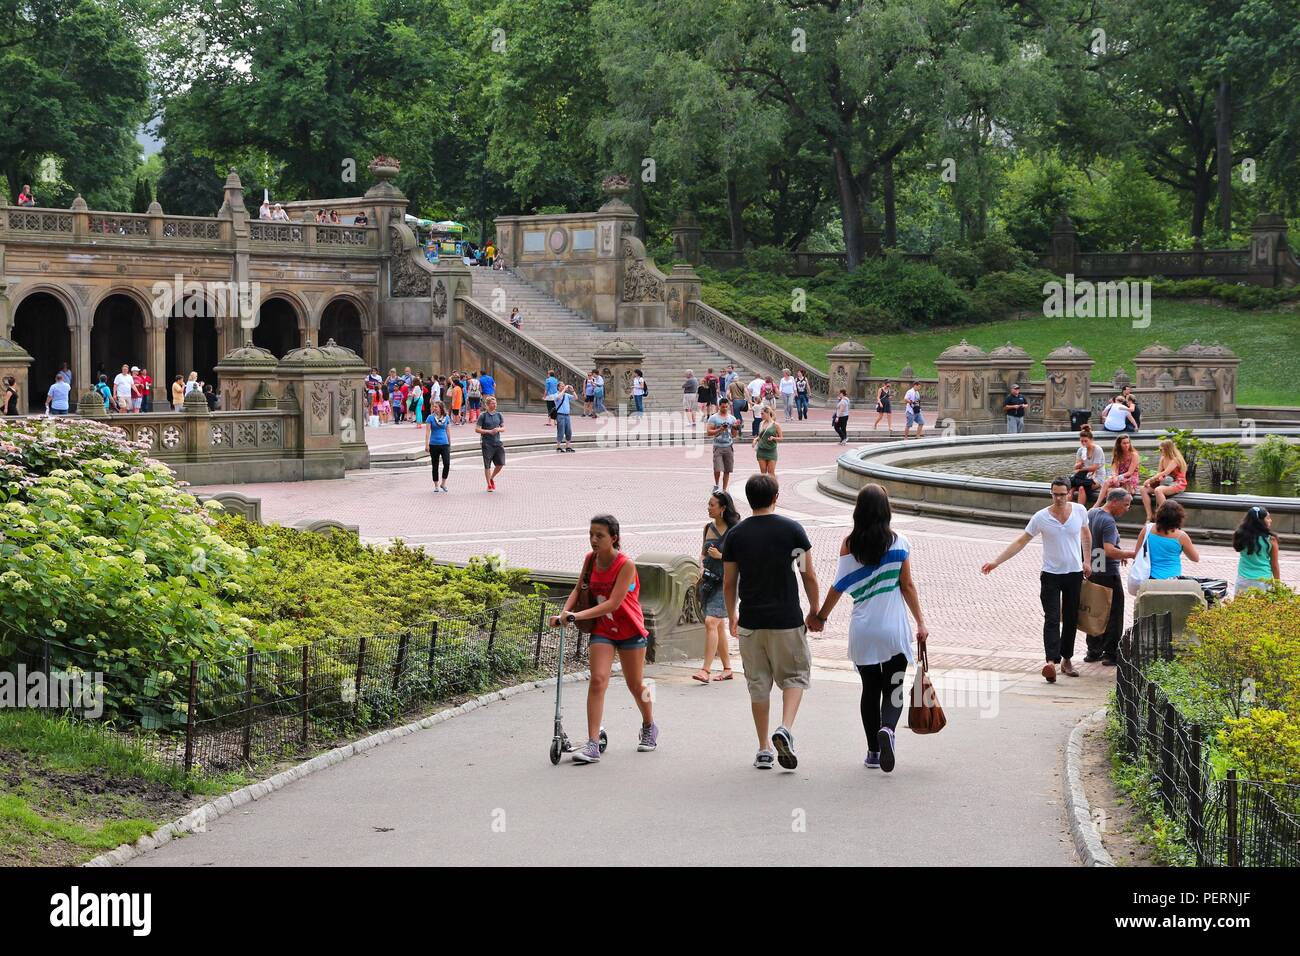 NEW YORK - JULY 3: People visit Central Park on July 3, 2013 in New York. Park opened in 1857 and covers 840 acres of land today. Stock Photo